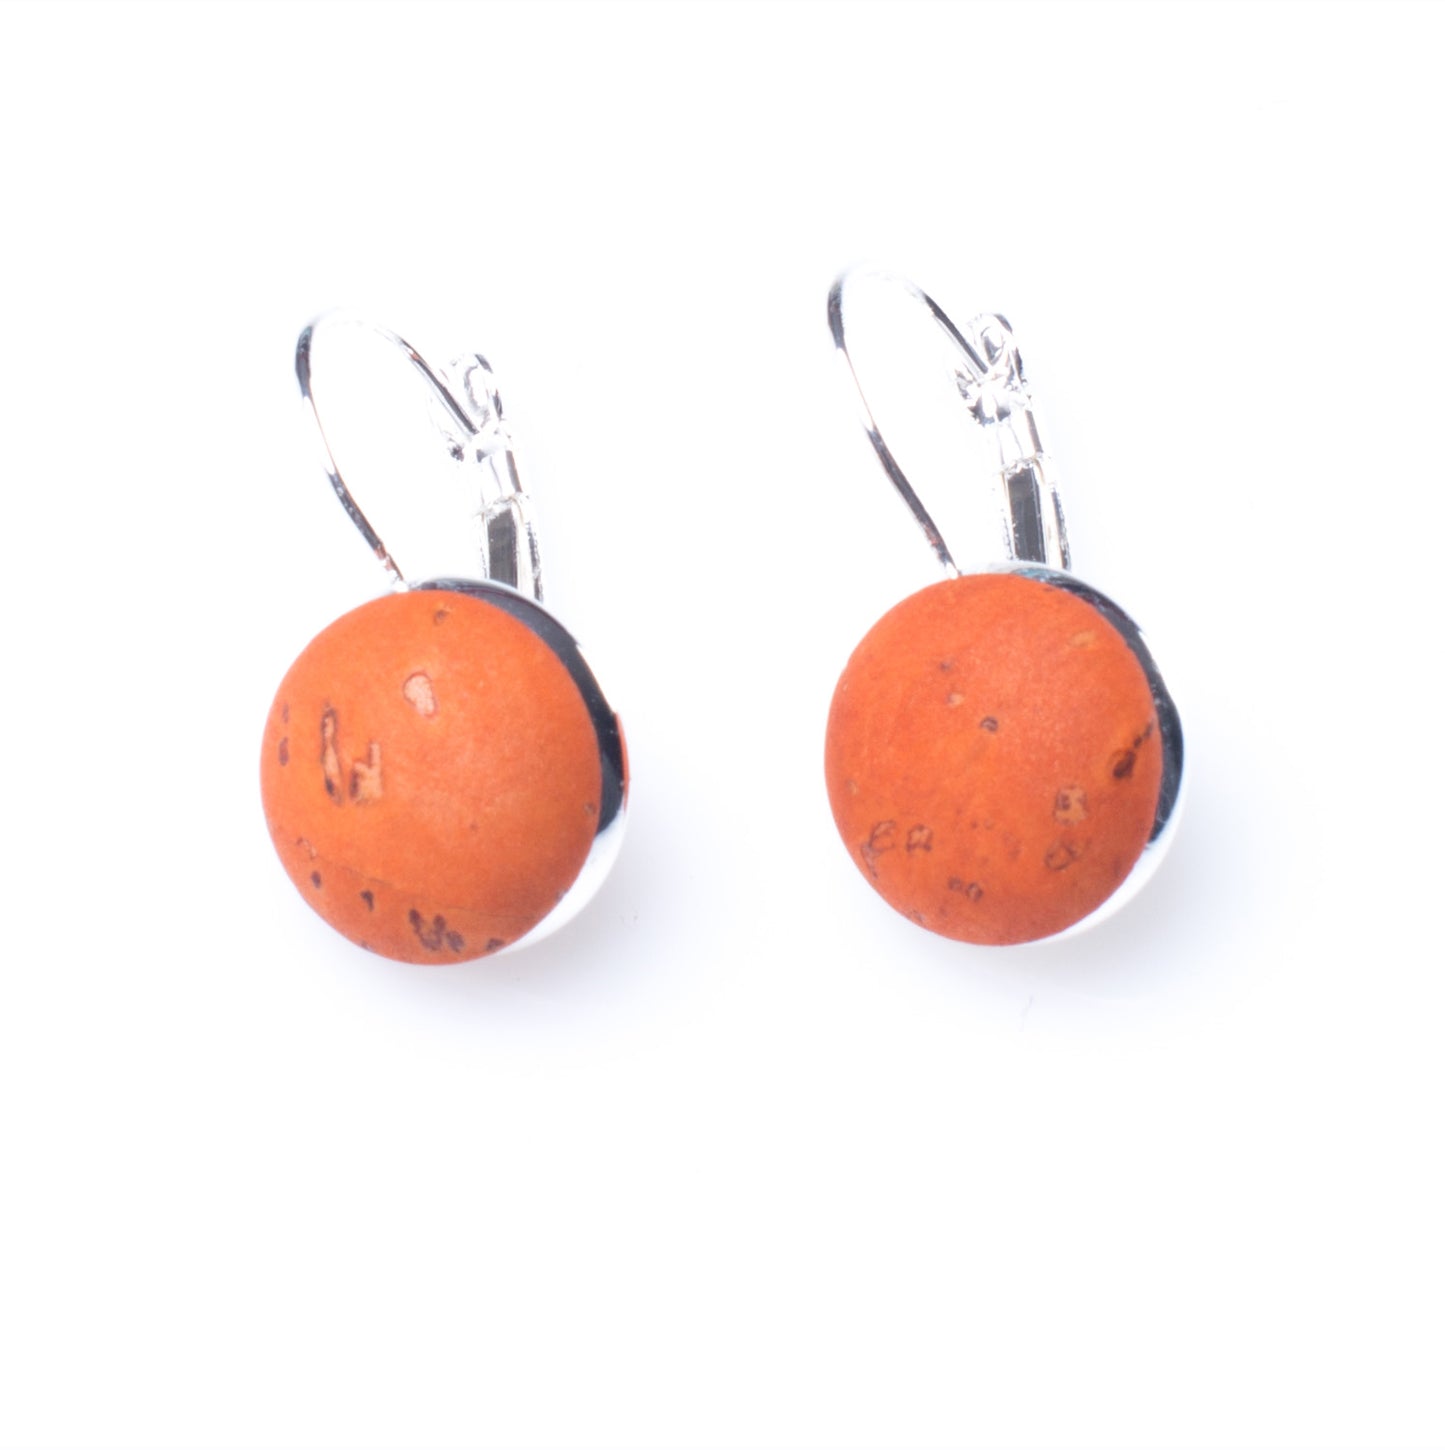 Hanging Cork Button Earrings | HowCork - The Cork Marketplace